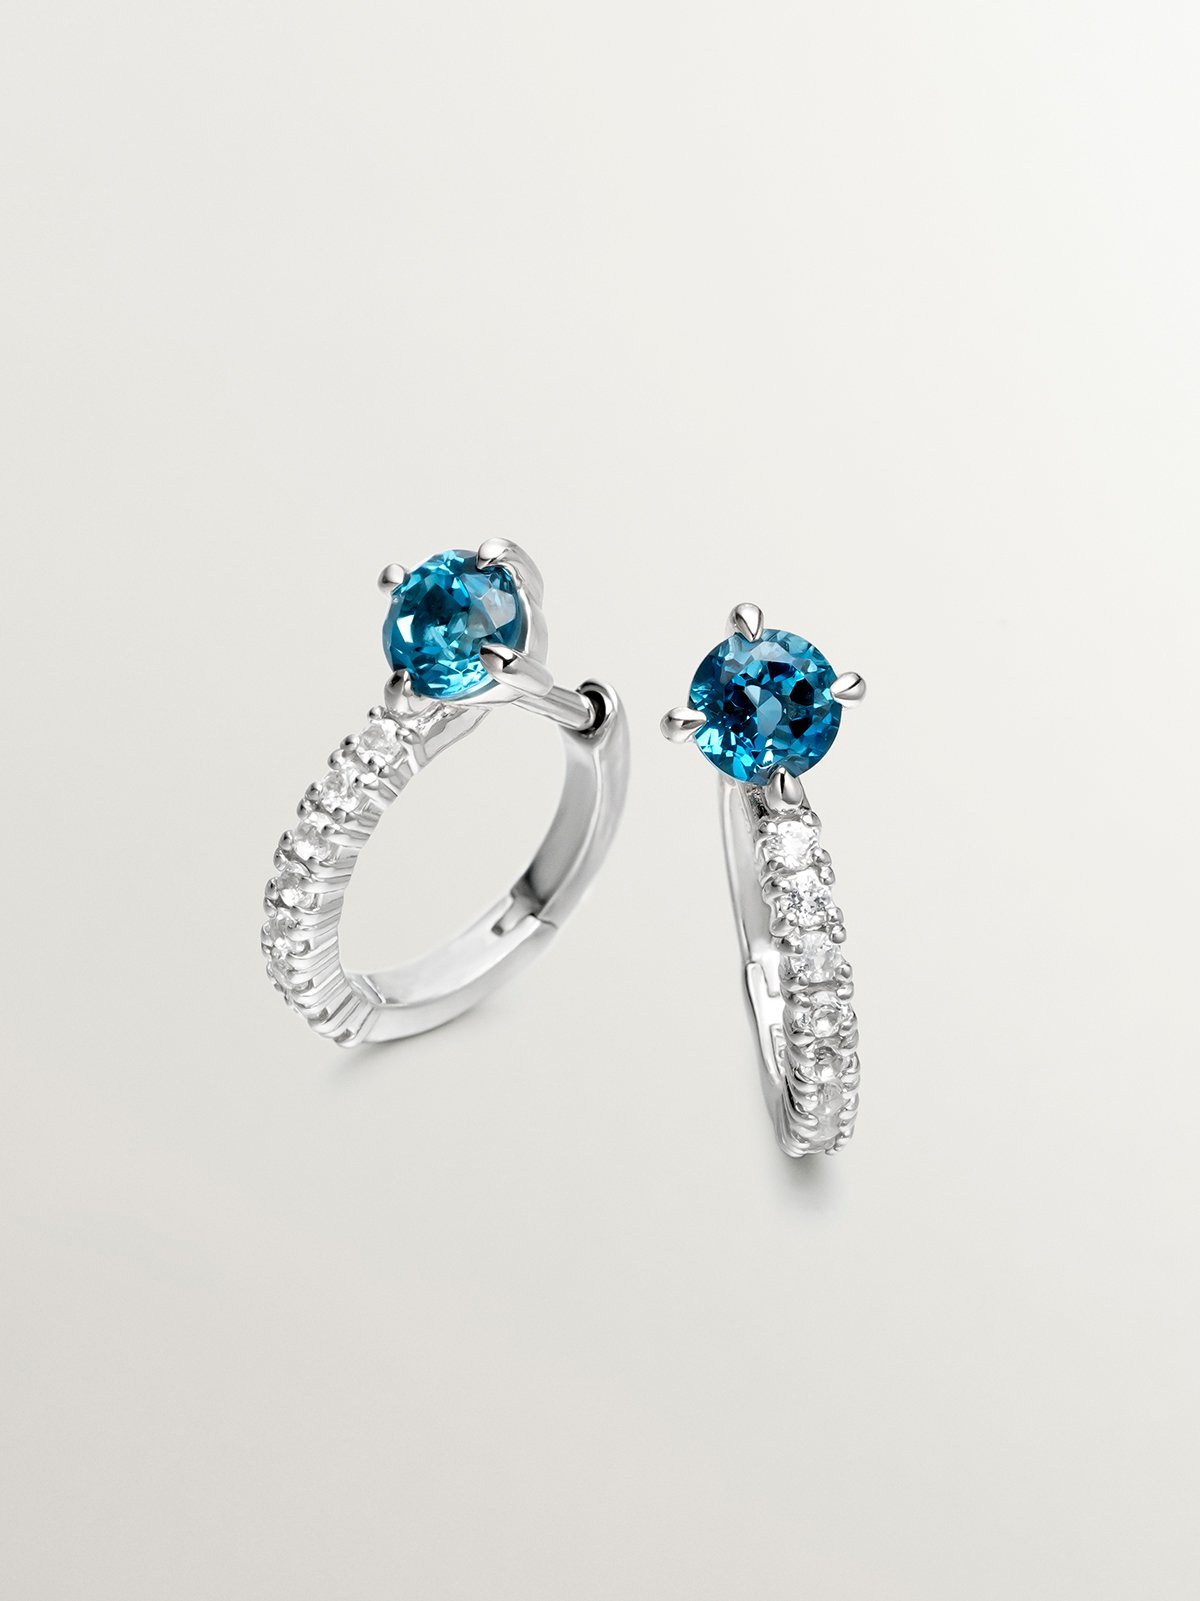 925 Silver hoop earrings with blue and white topaz.